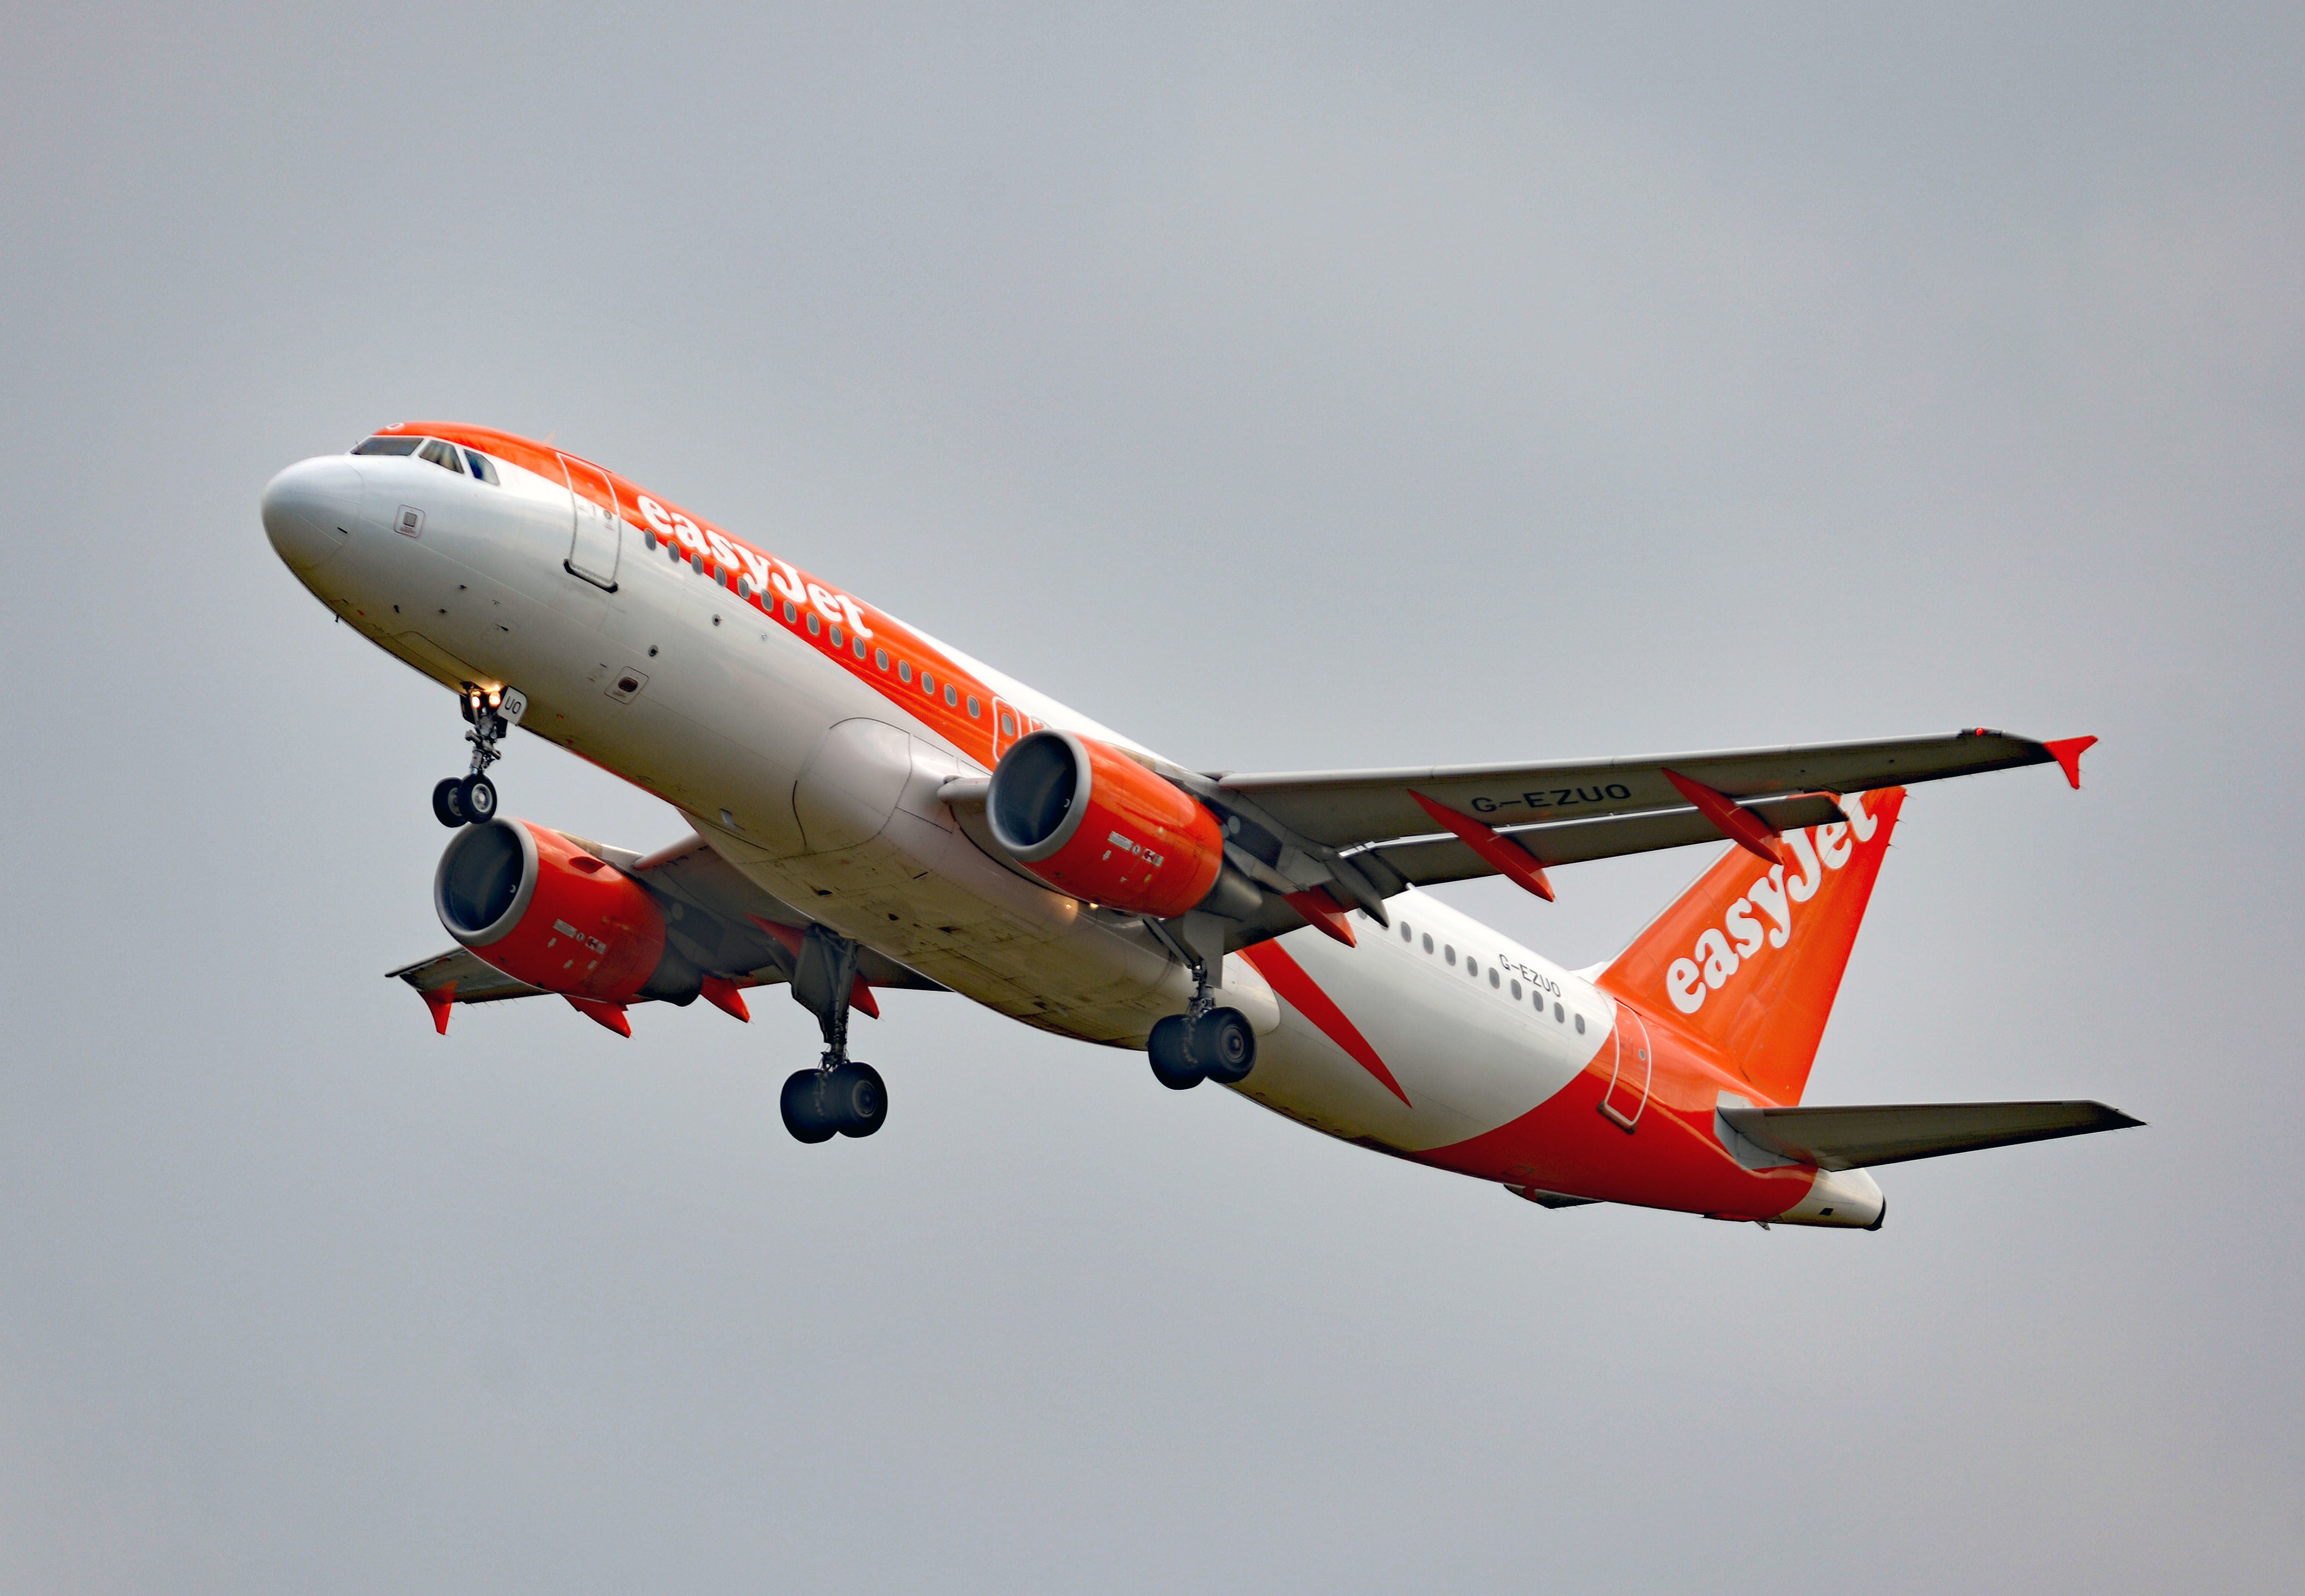 The incident occurred on an easyJet flight